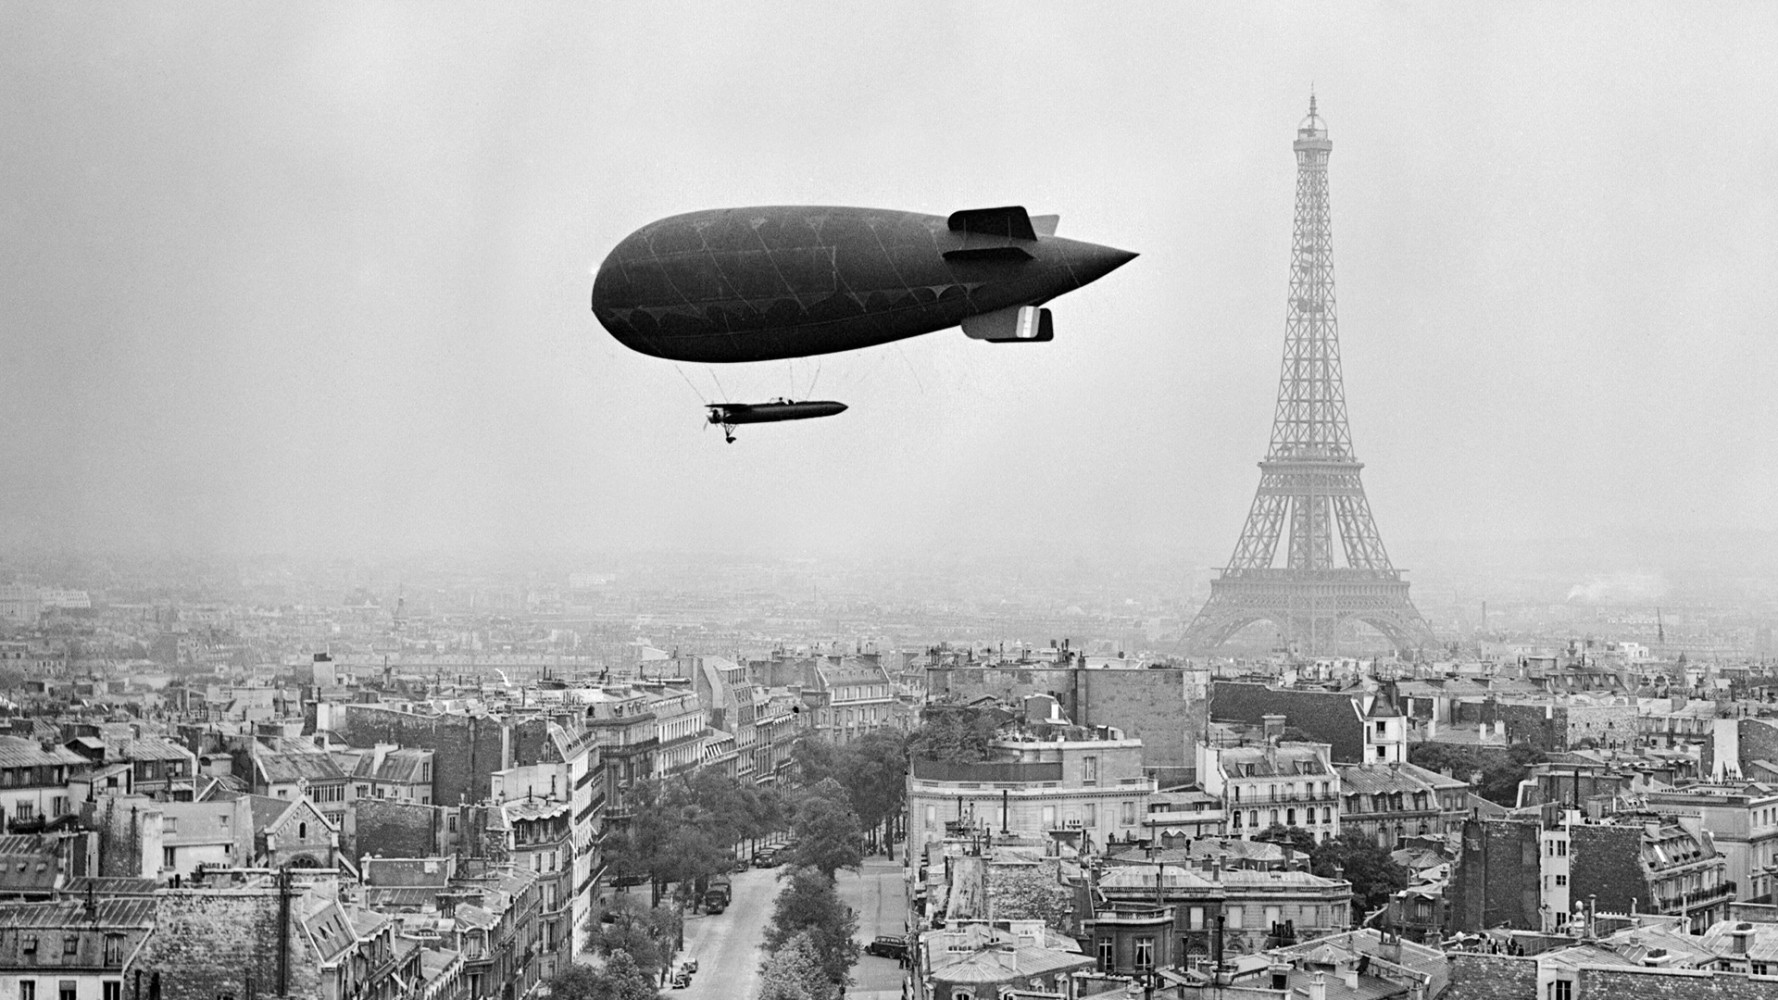 An airship flying above Paris, with the Eiffel Tower dominating the skyline.